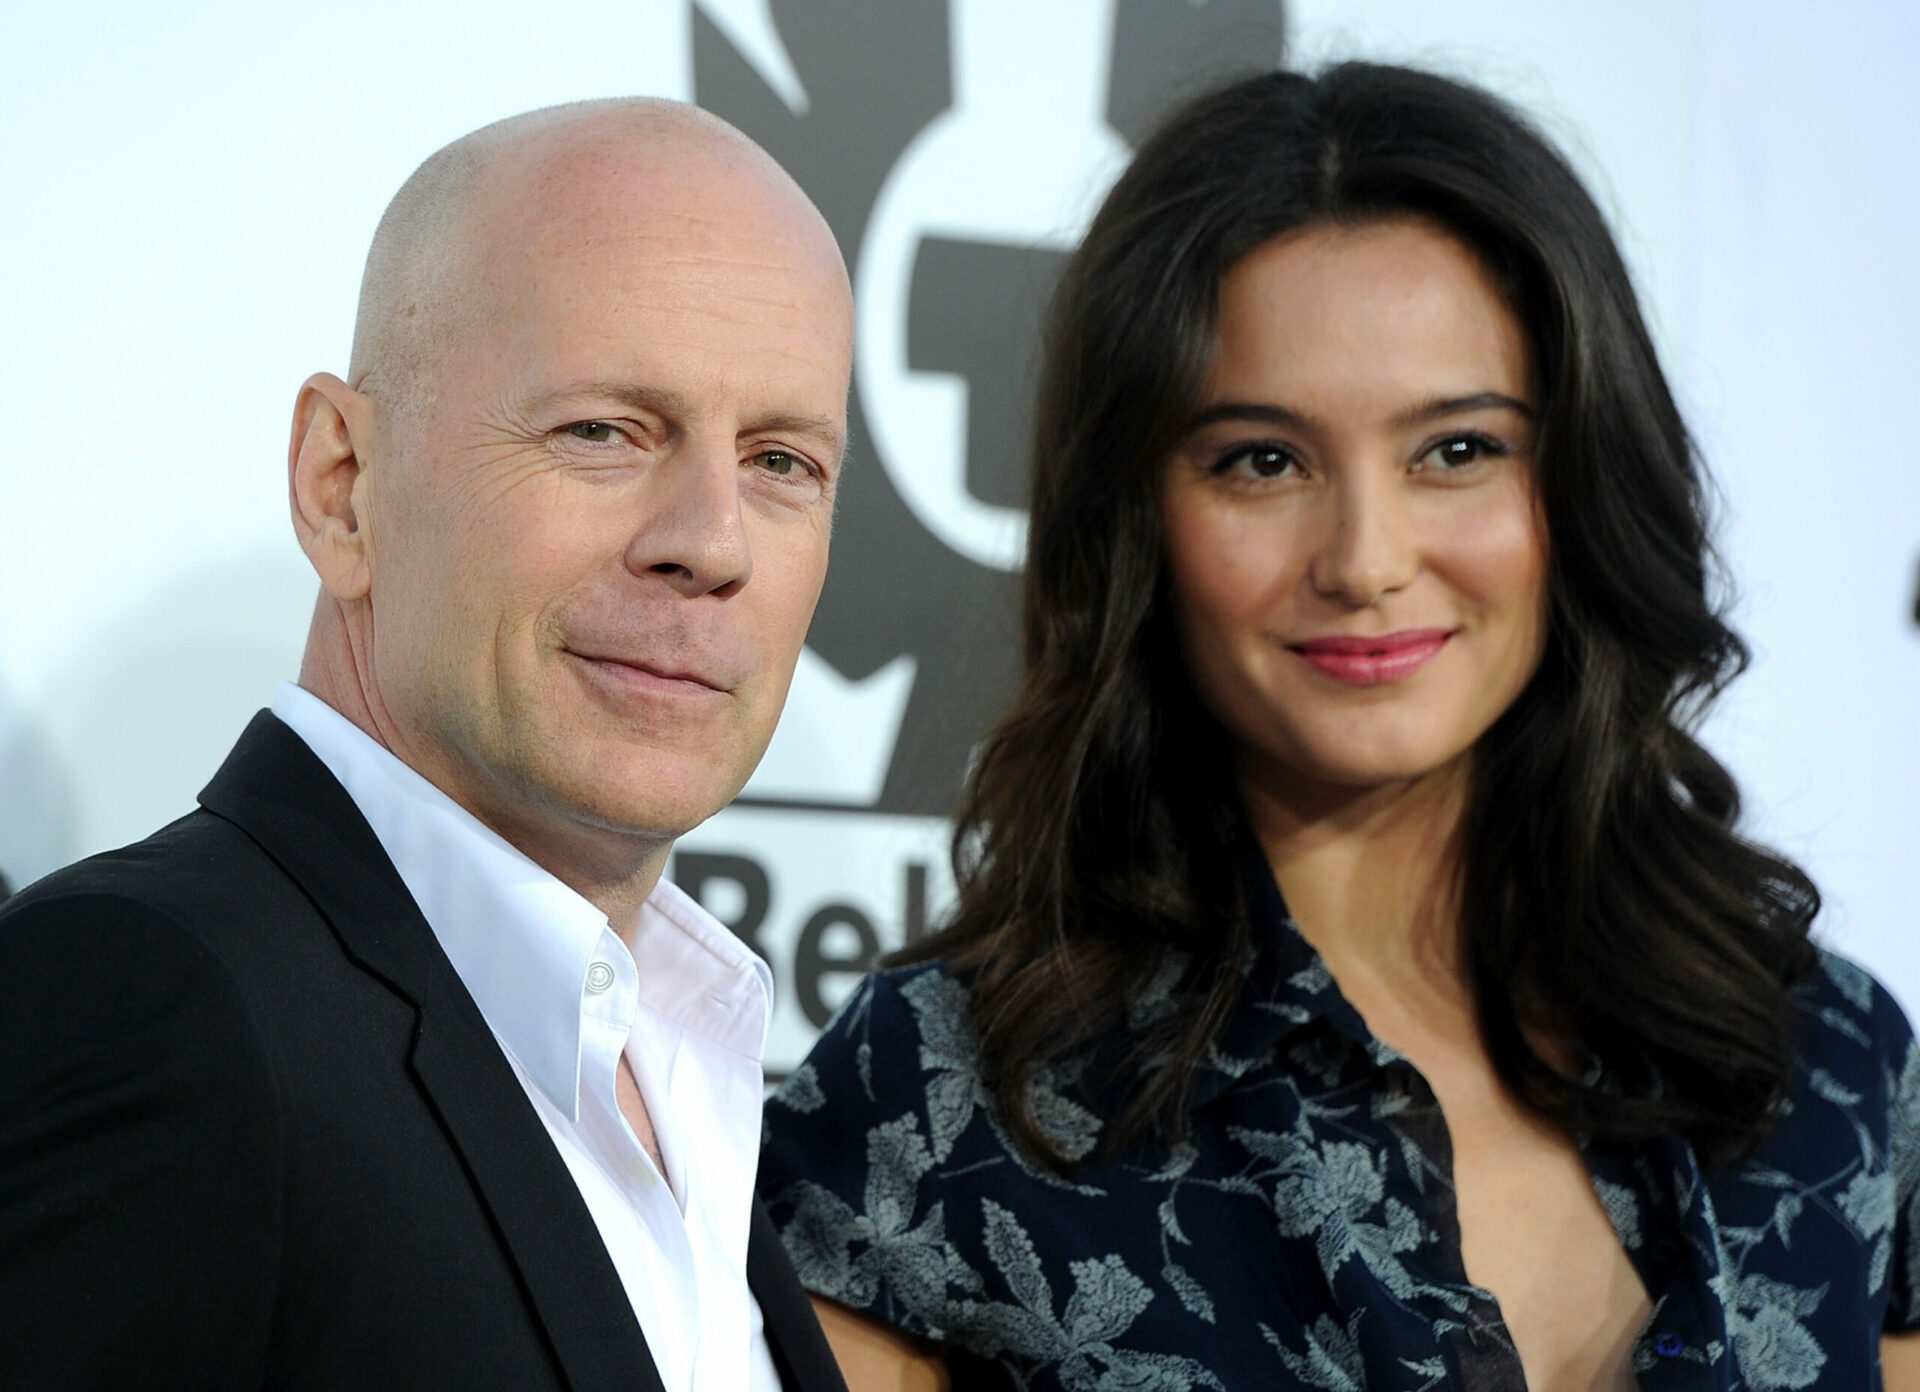 Bruce Willis’ wife counters ‘clickbait’ with details of ‘beauty and soulfulness’ in actor’s life